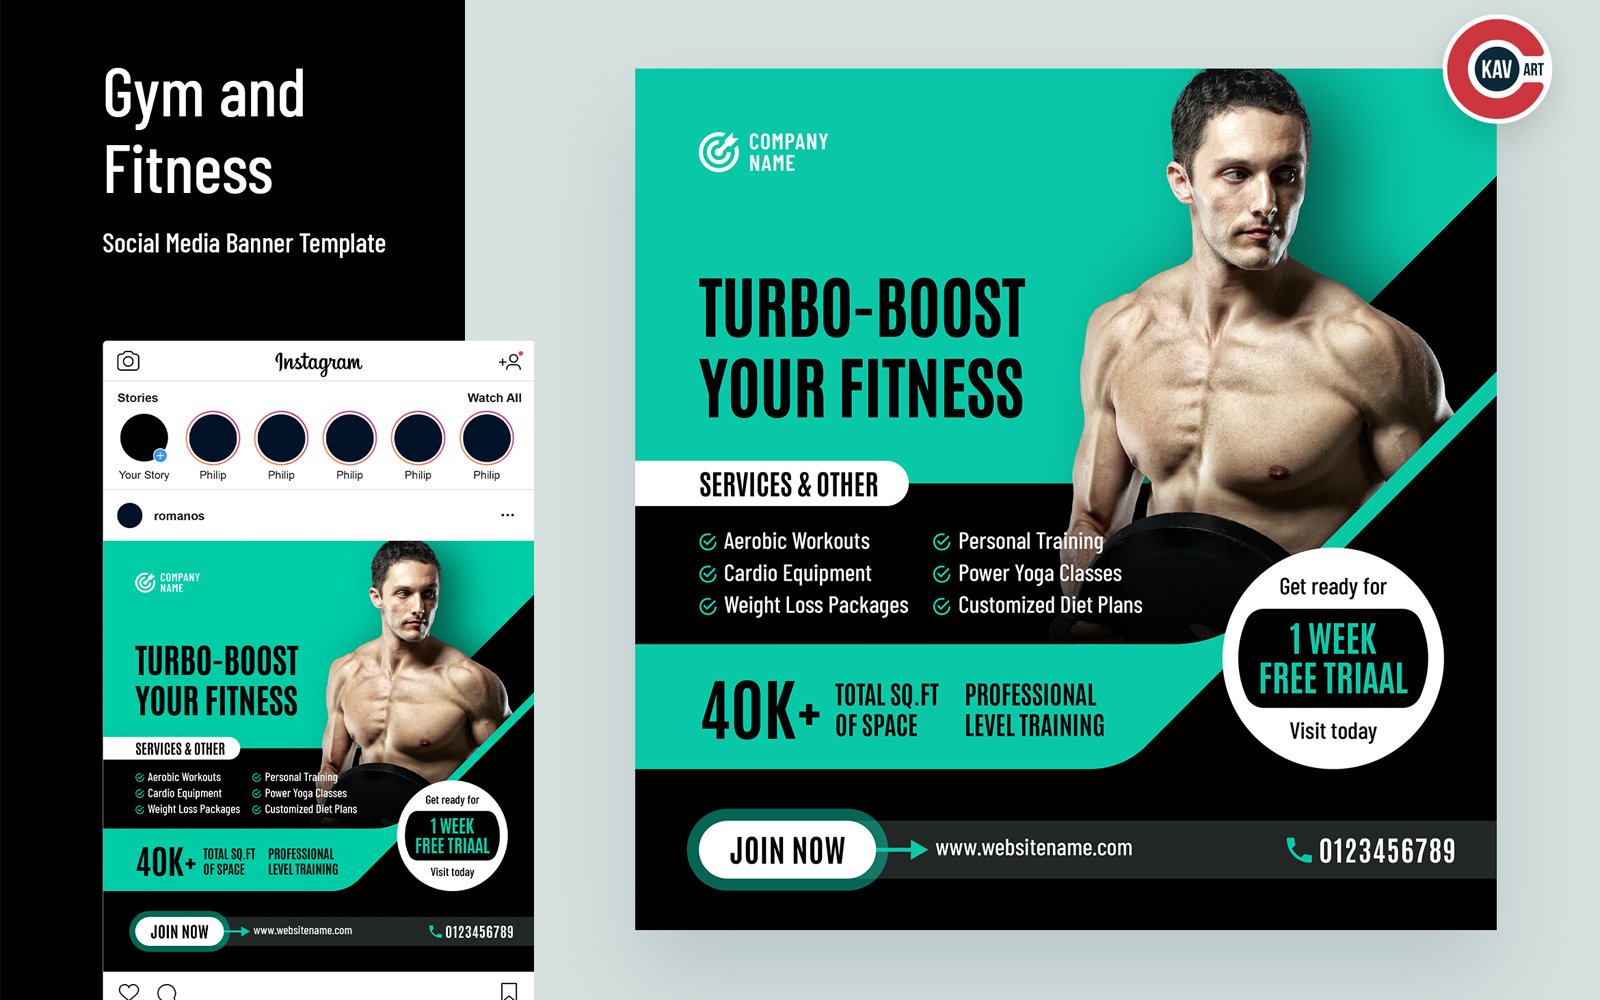 Gym and Fitness Social Media Banner Template - 00265